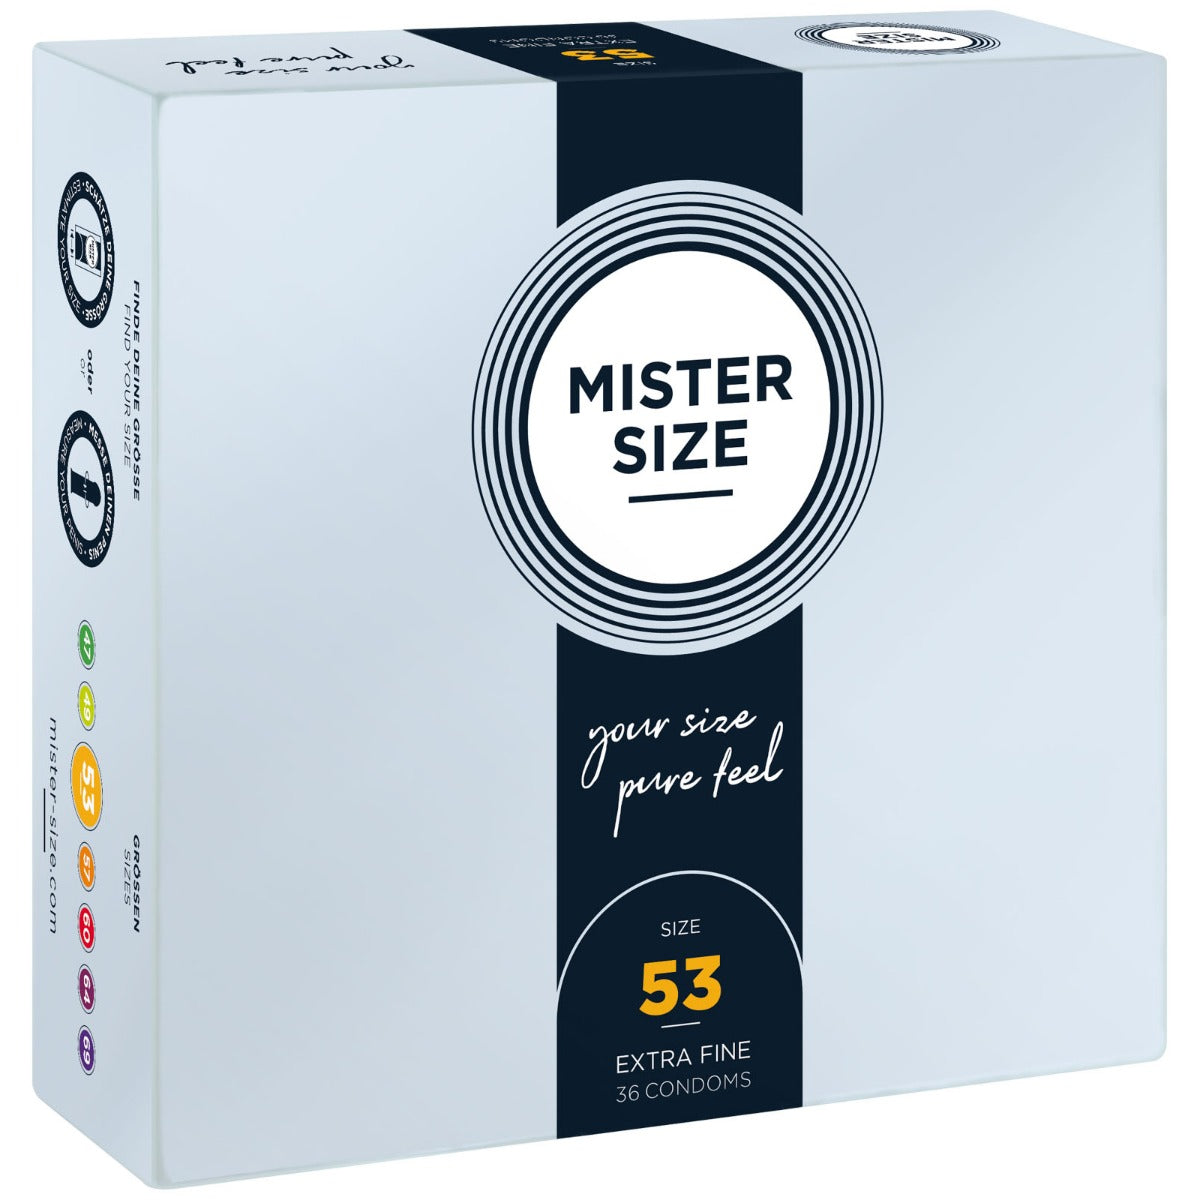 Condoms MISTER SIZE - pure feel Condoms - Size 53 mm (36 pack)   